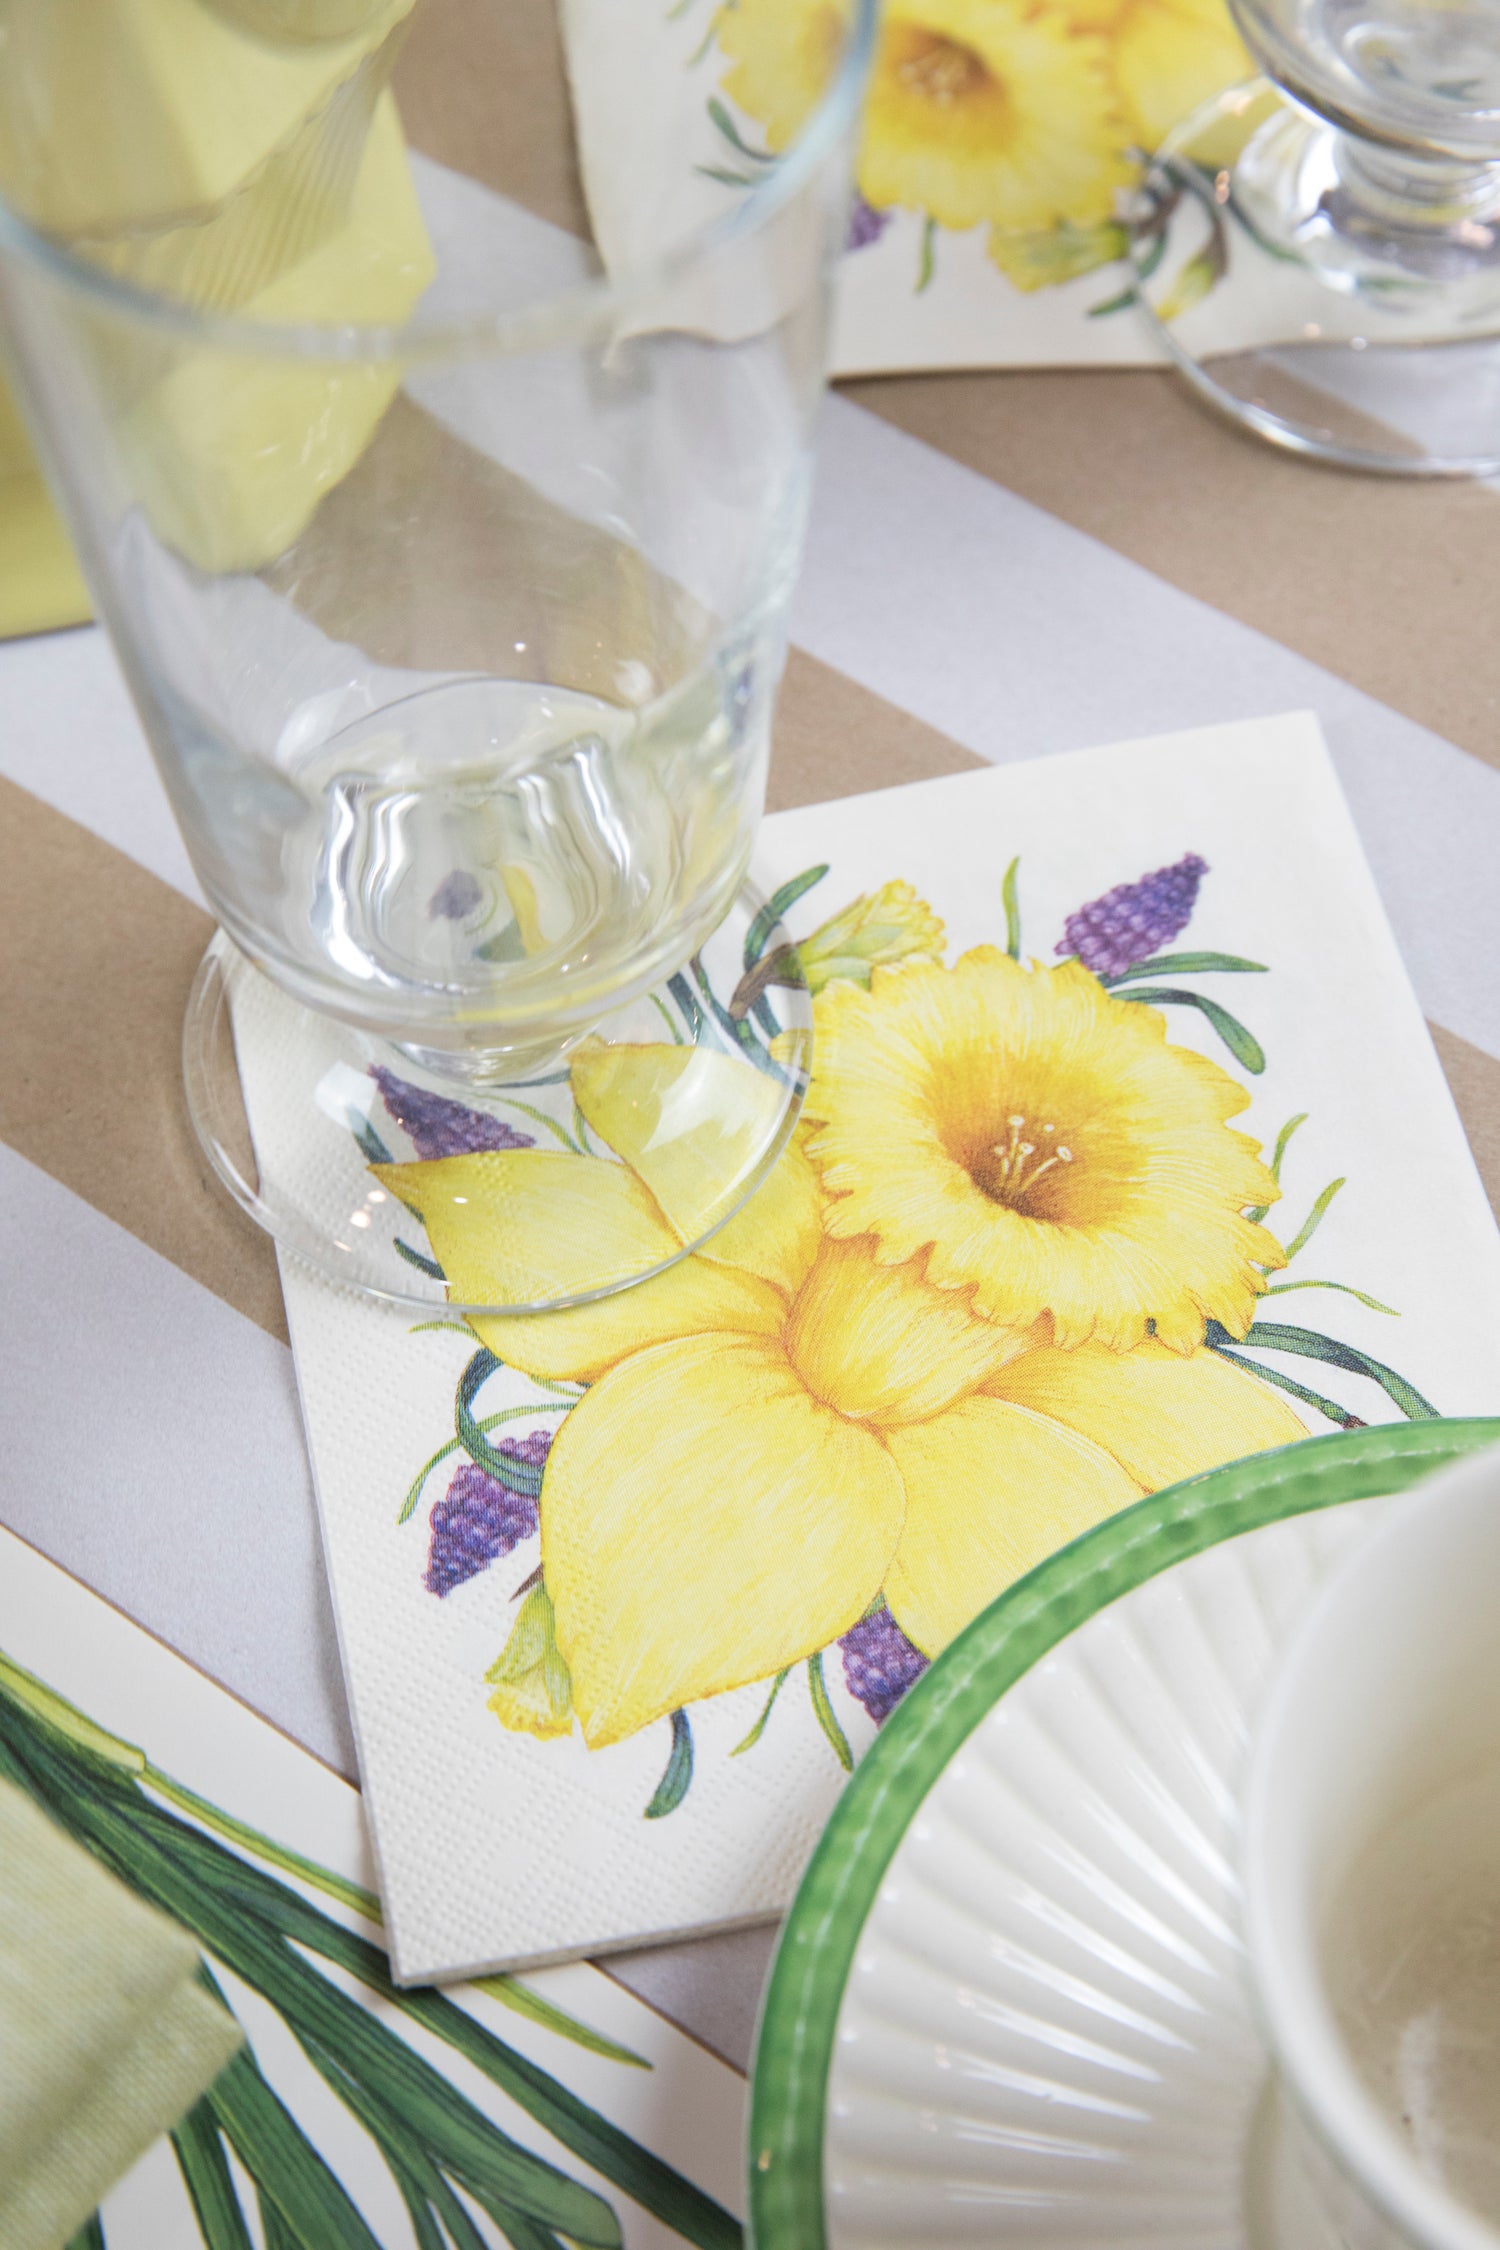 A Daffodil Cocktail Napkin under a water glass in an elegant place setting.